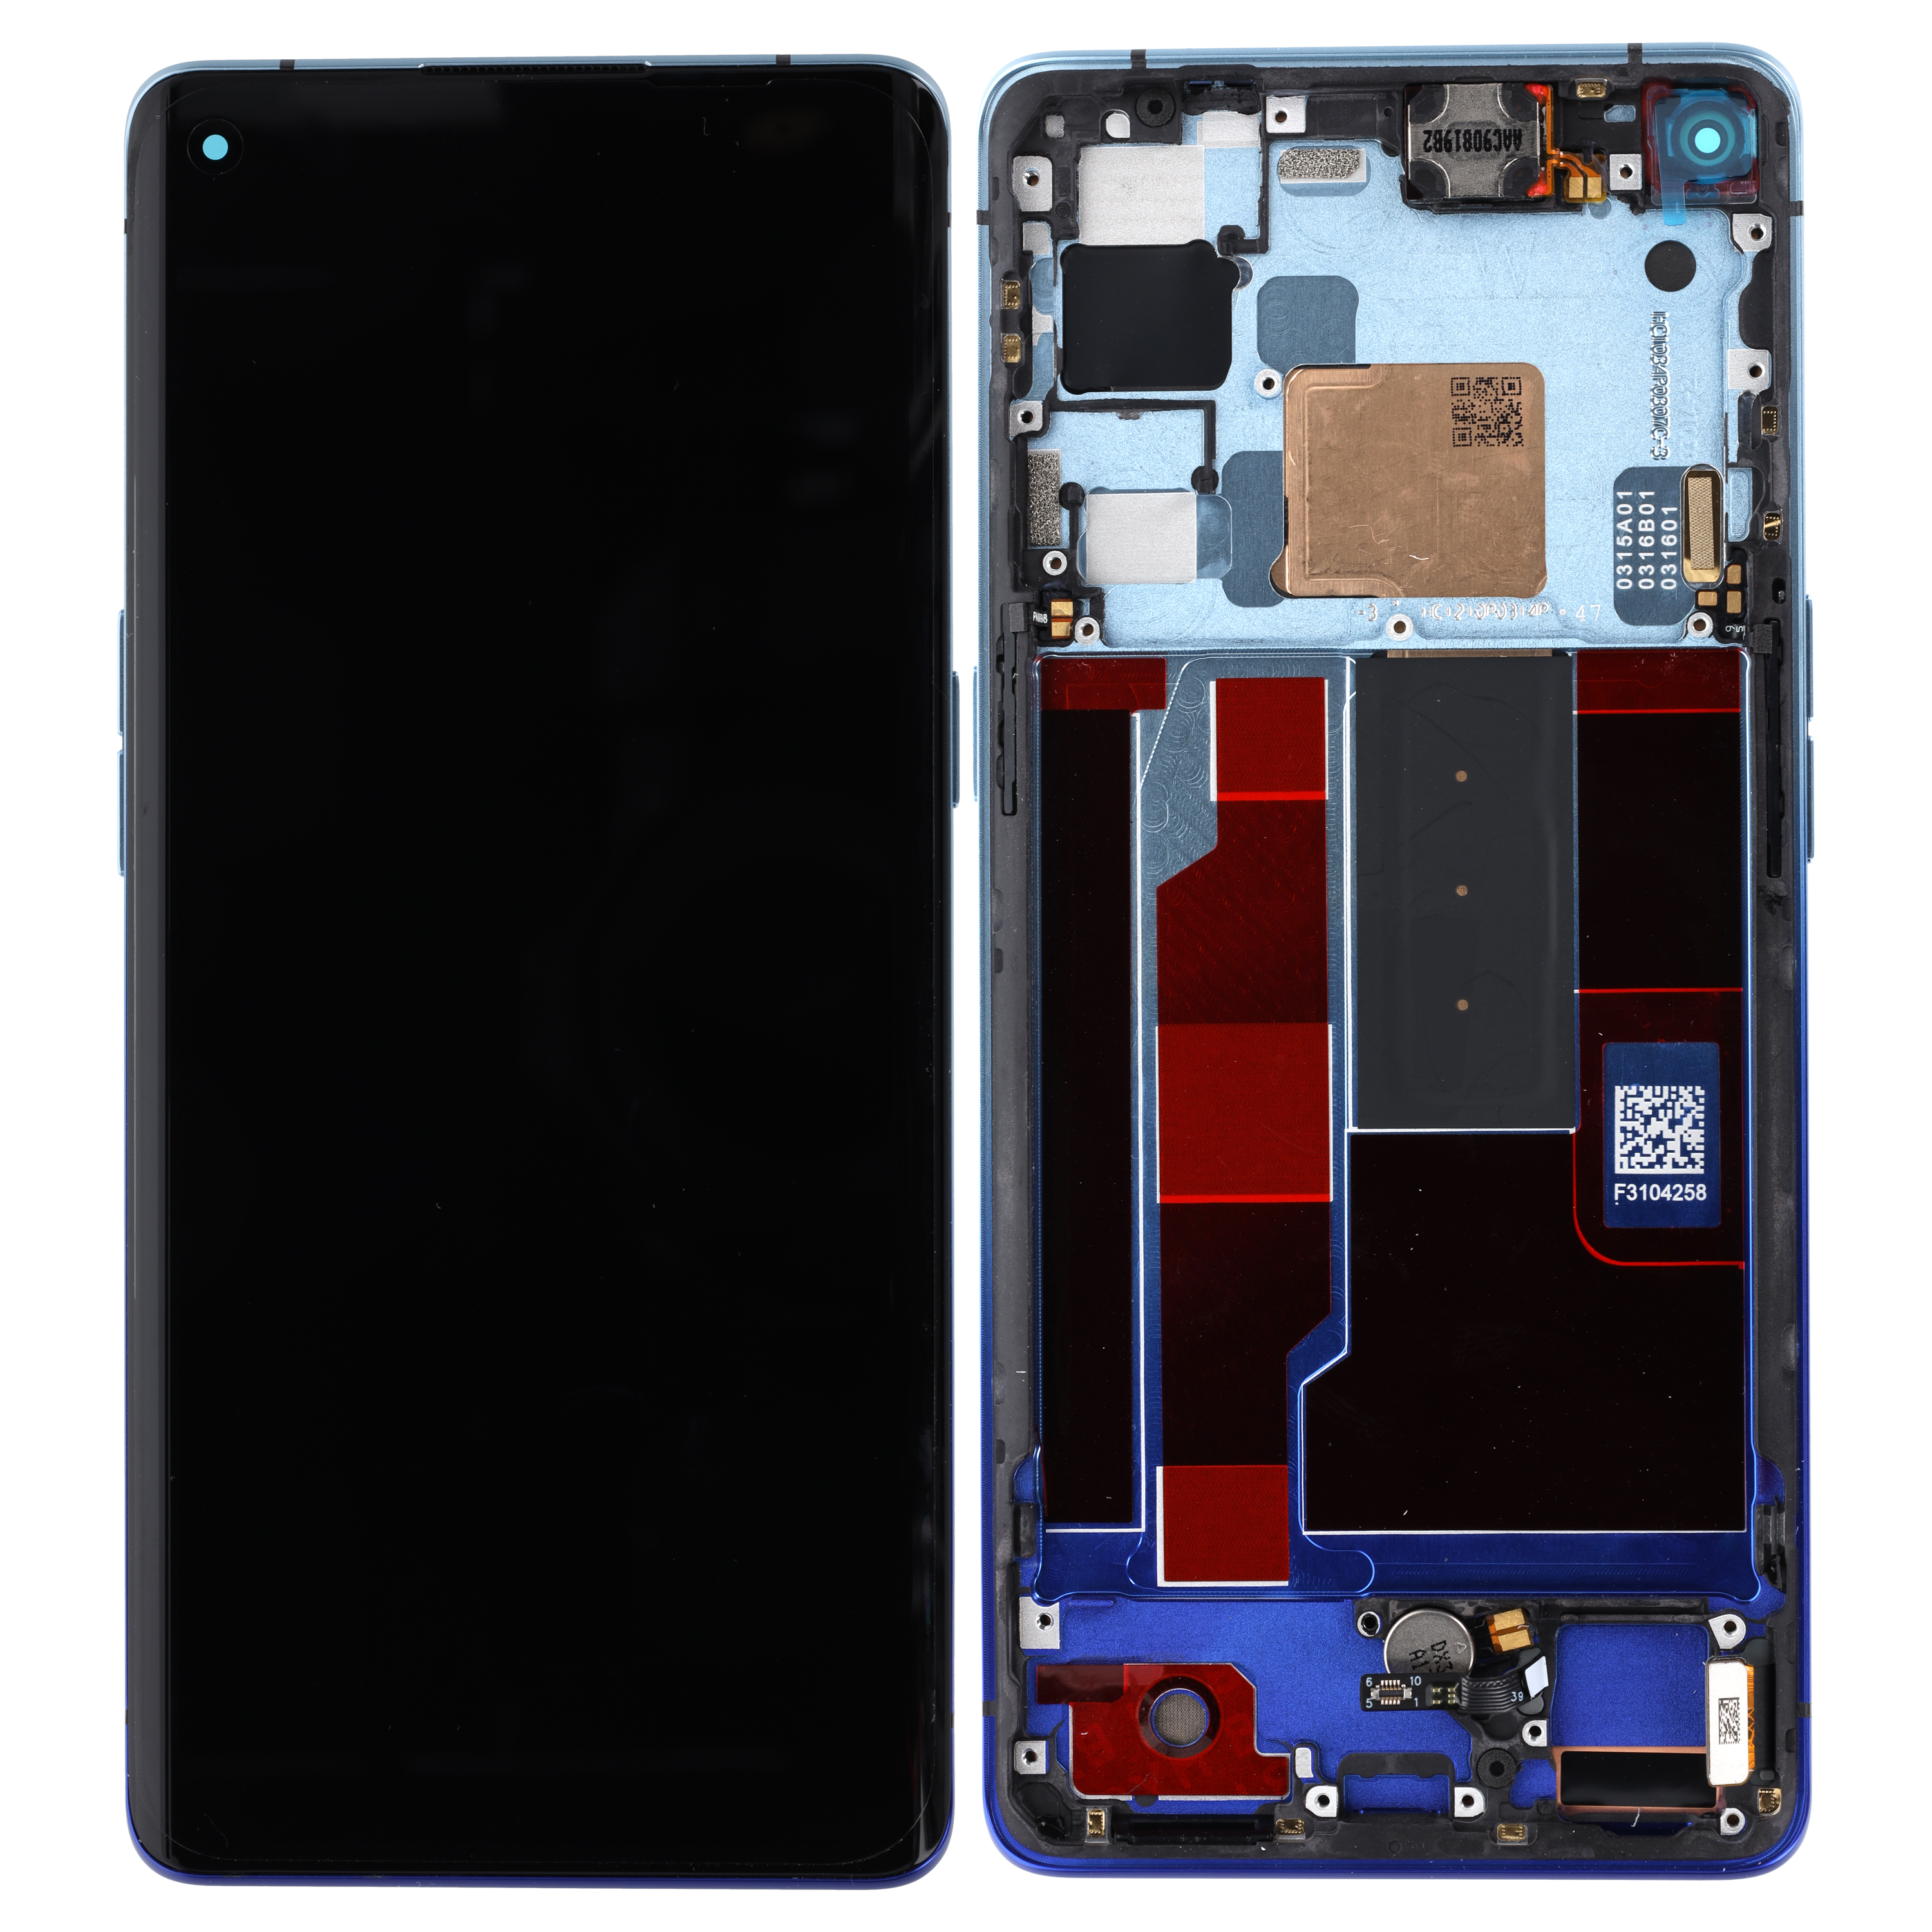 Oppo Find X2 Neo (CPH2009) LCD Display, StarryBlue